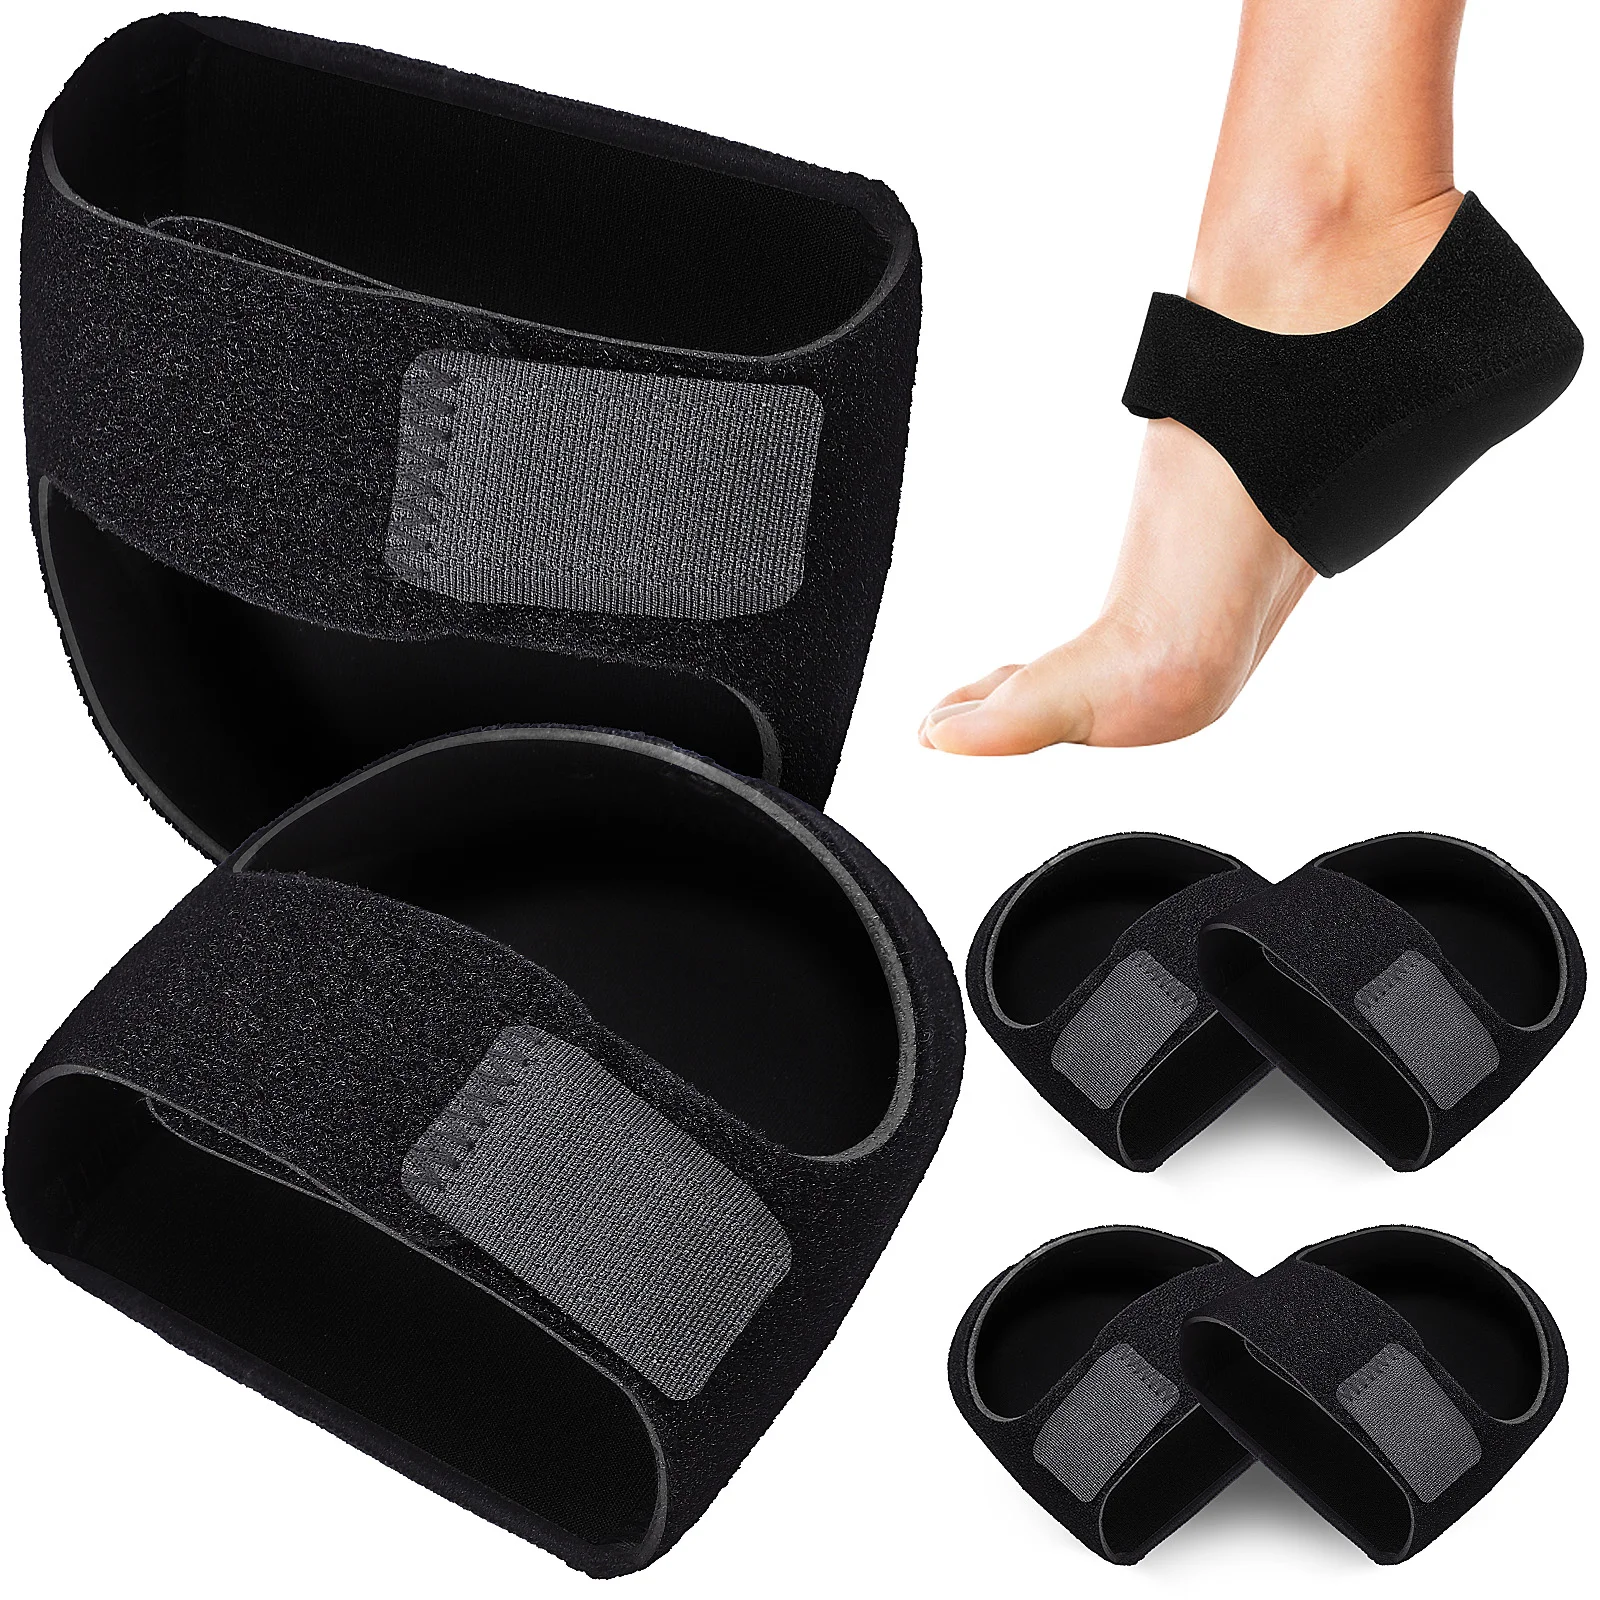 3 Pairs Heel Protector Cups Pain Spur Relief Products Plantar Fasciitis Cushion Silicone Coaster Protectors Pads Coasters